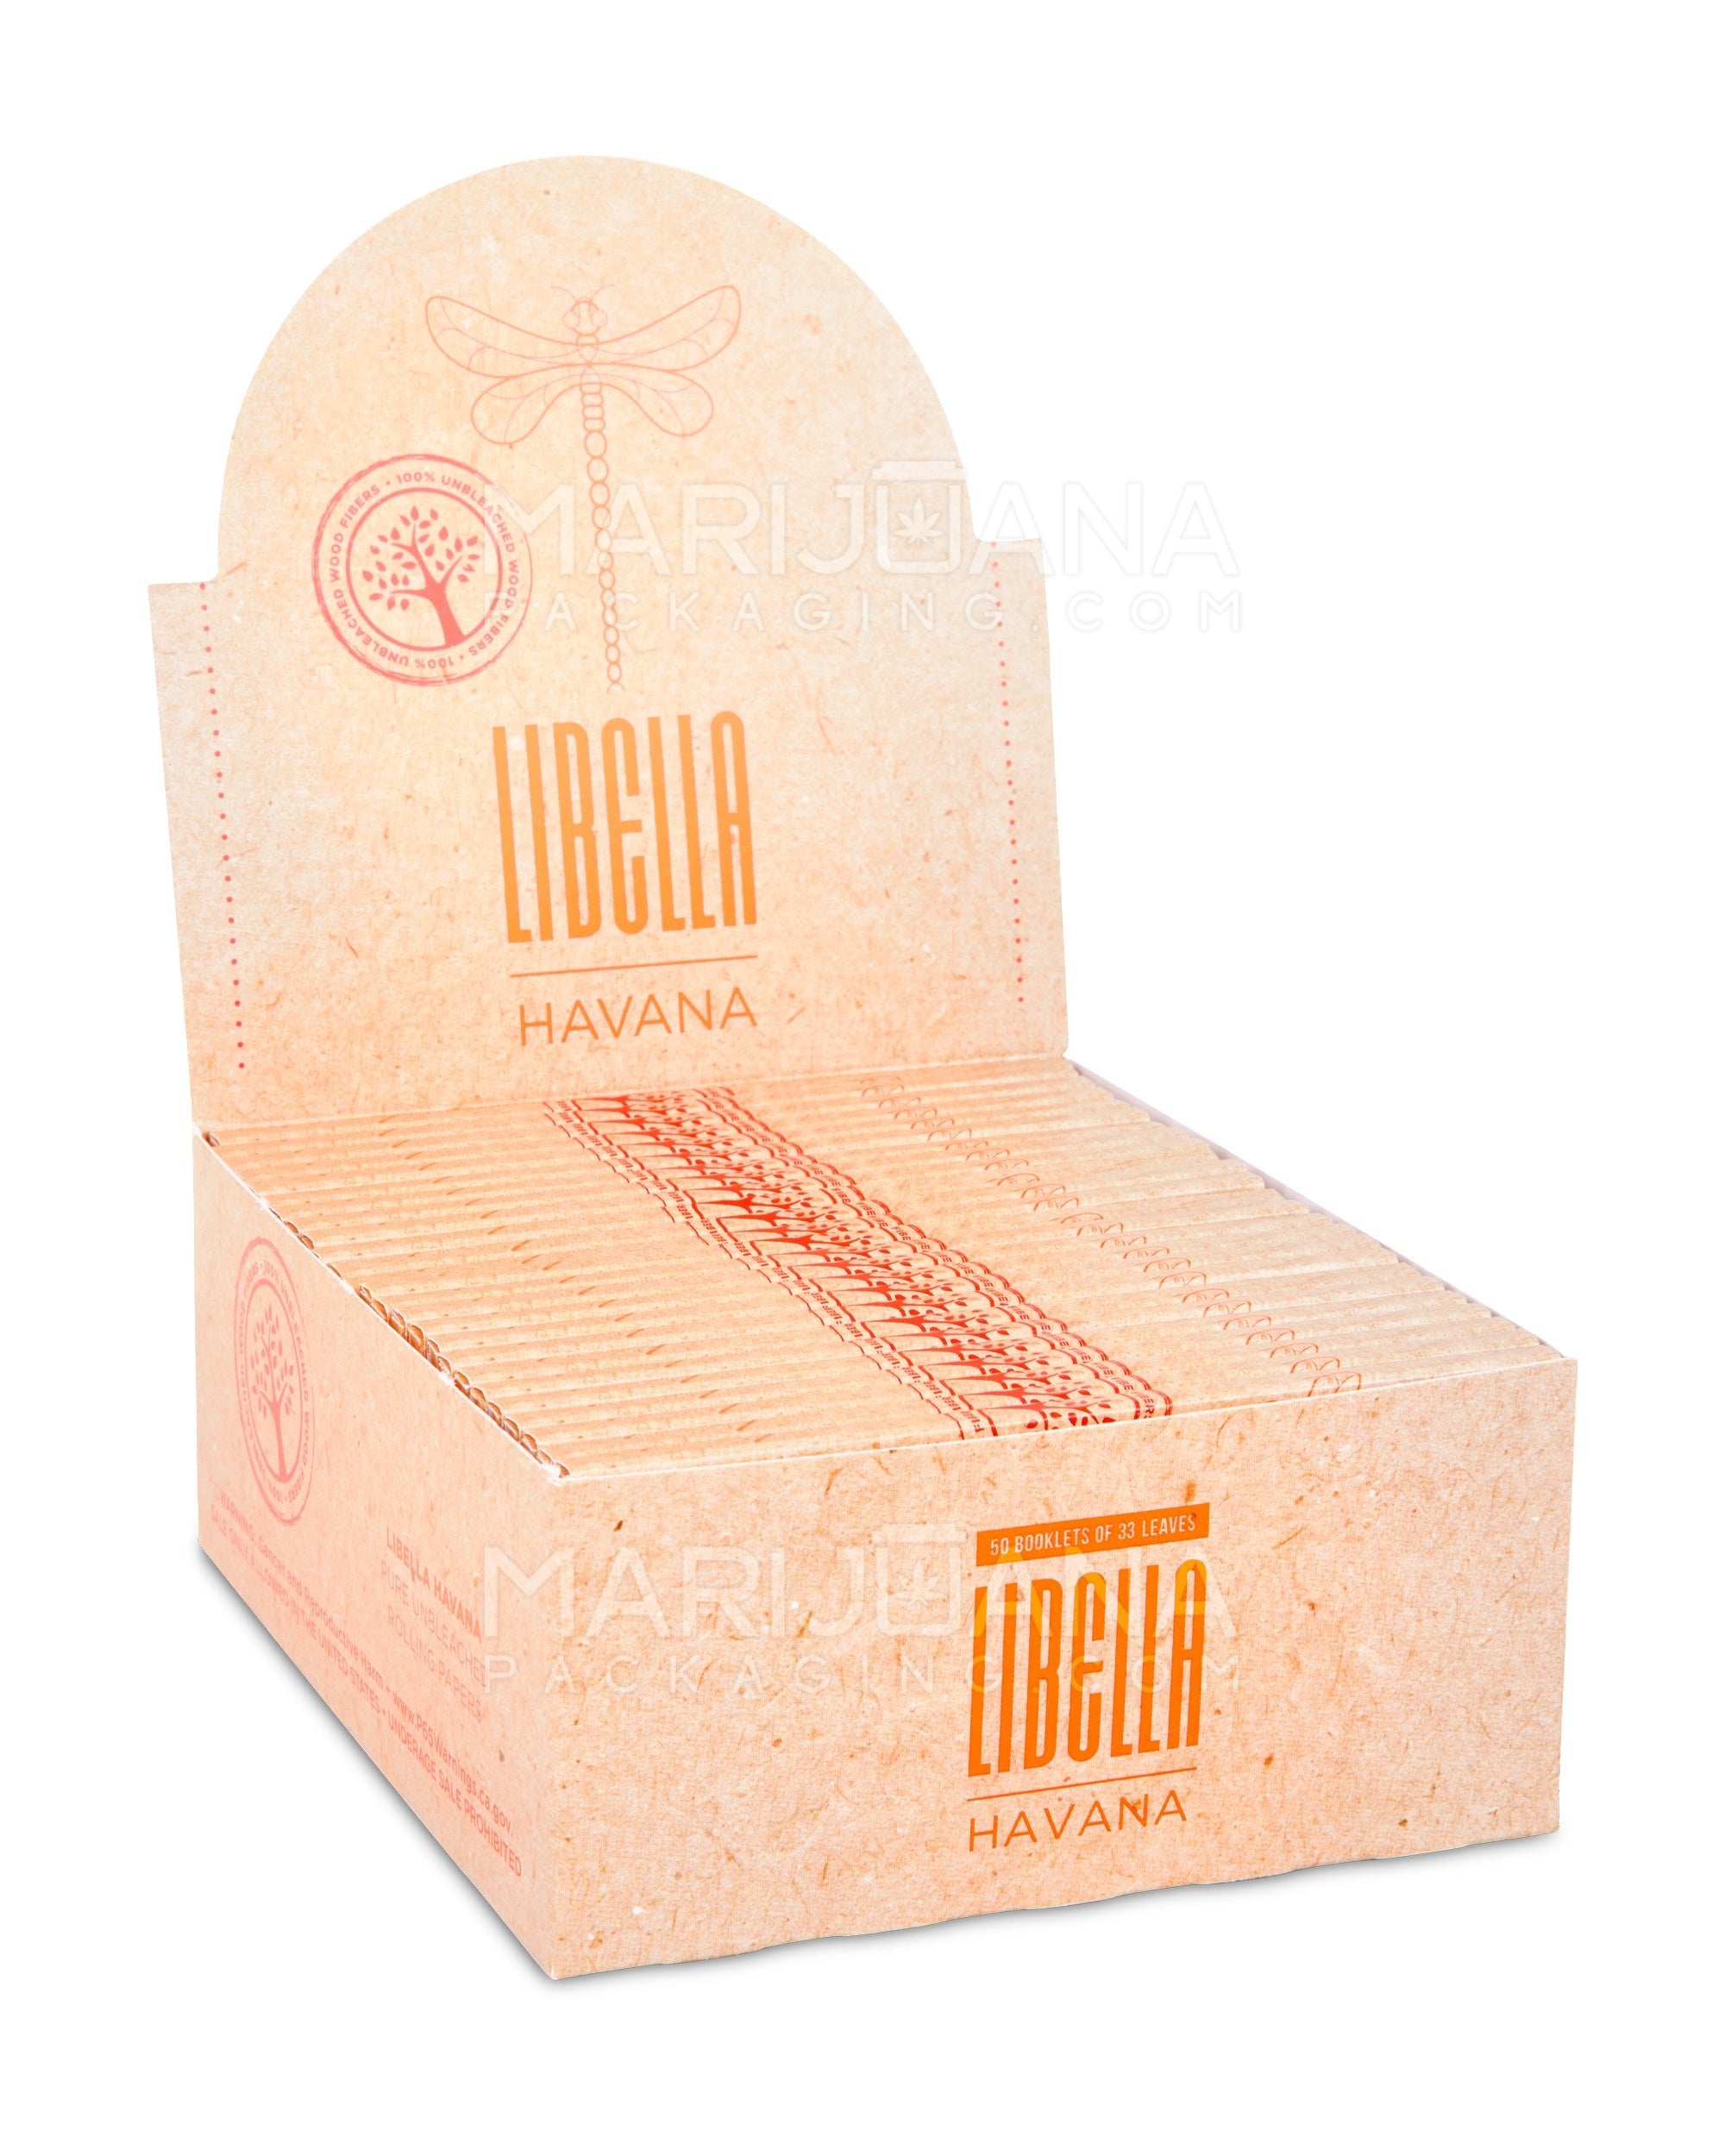 LIBELLA | 'Retail Display' King Size Slim Natural Unbleached Rolling Papers | 108mm - Havana - 50 Count - 1